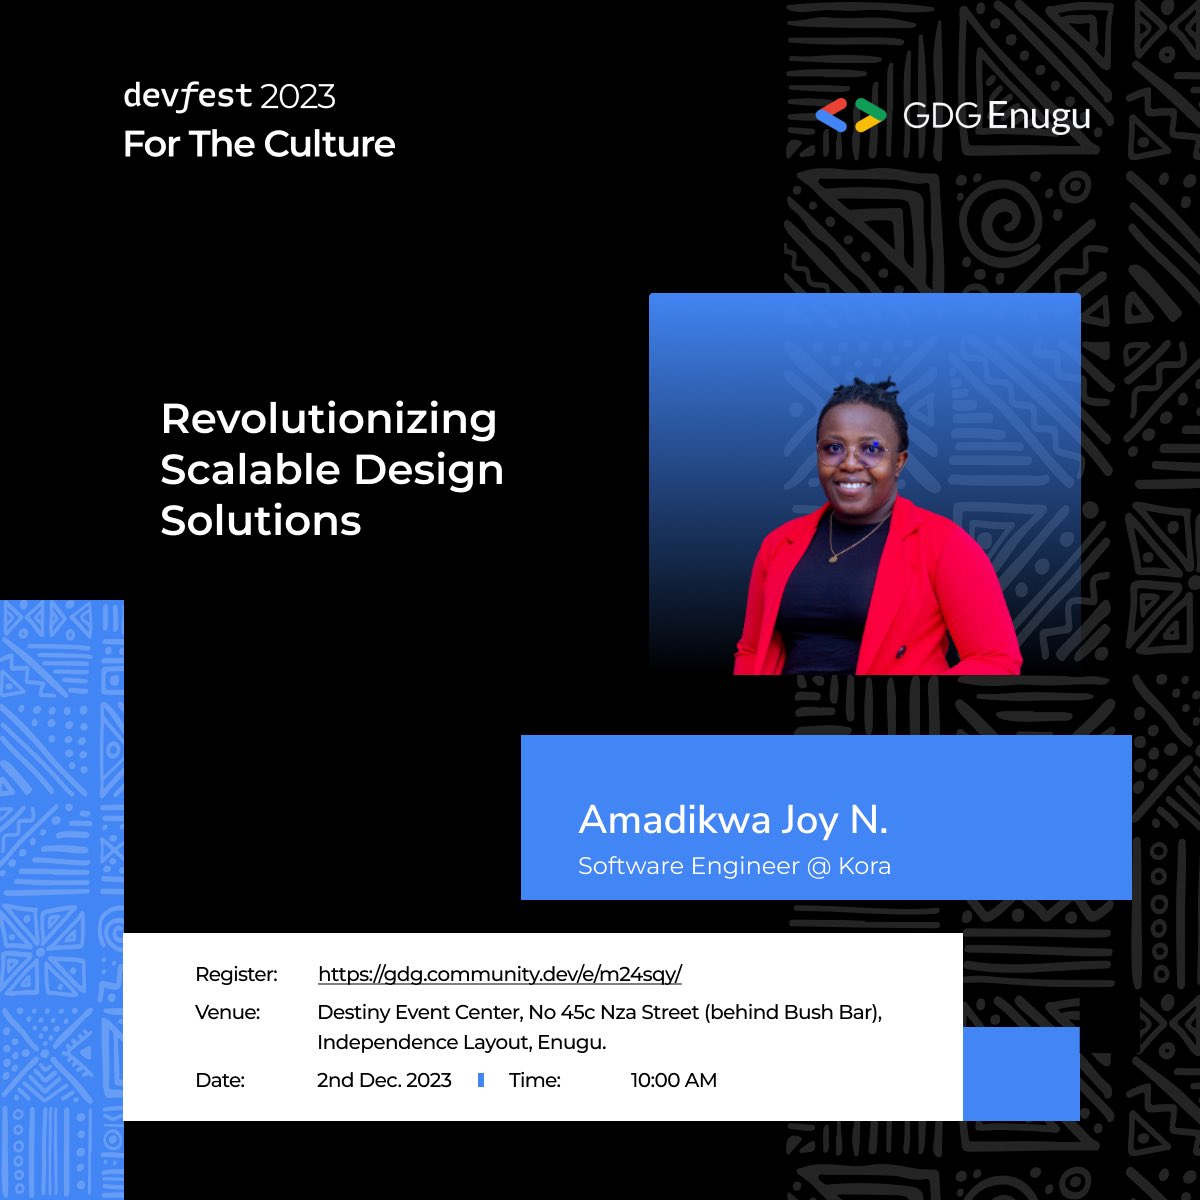 So, I will be giving a talk at Devfest Enugu tomorrow at ‘Revolutionizing Scalable Design Solutions’. Let’s connect tomorrow if you will be physically available. #DevFest2023 #DevFest #DevFestEnugu #DevFest23